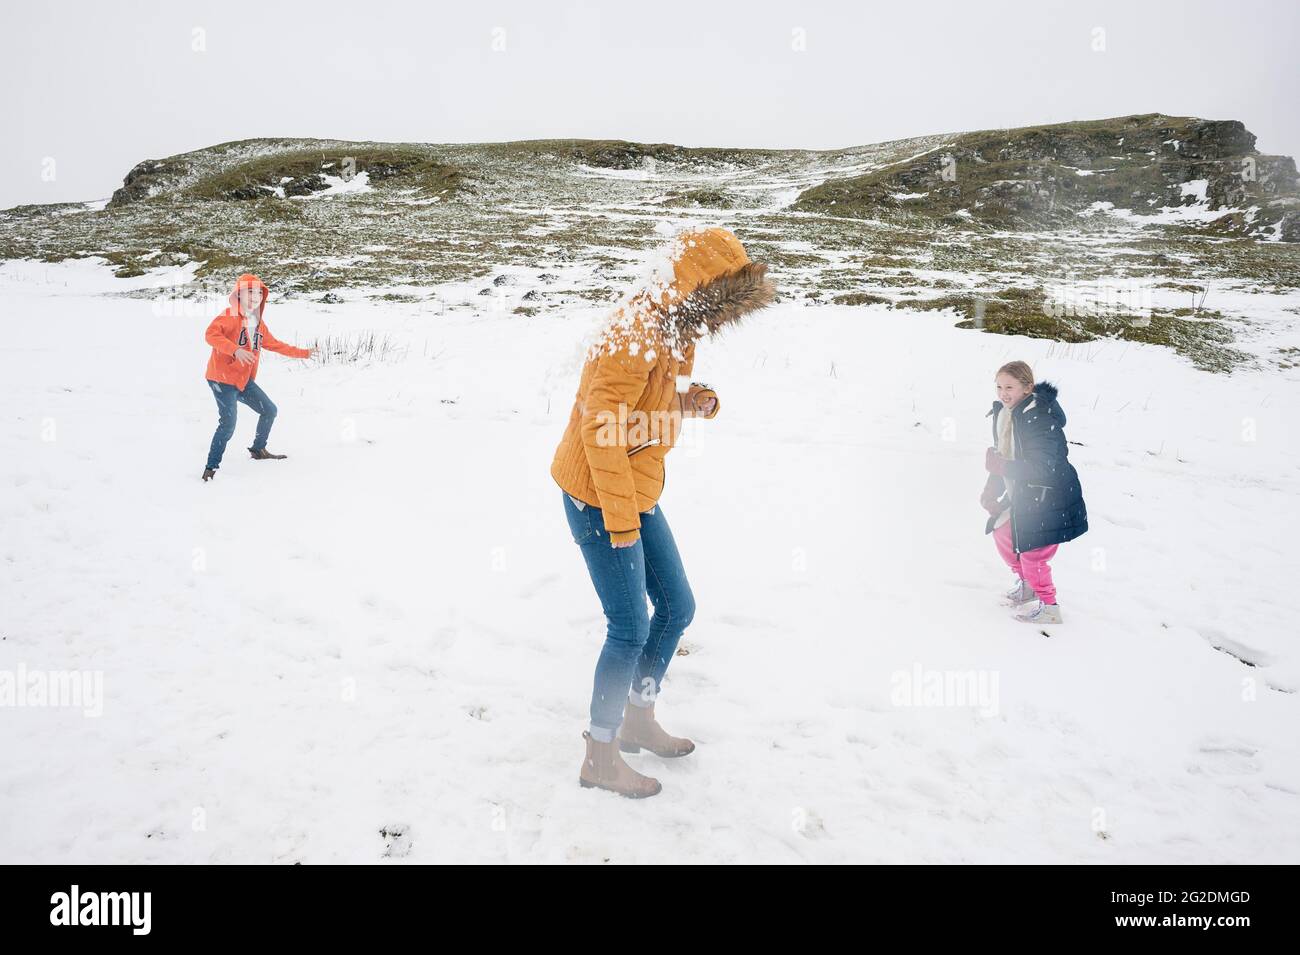 A family have fun in the cold snow which has settled on the ground. Stock Photo